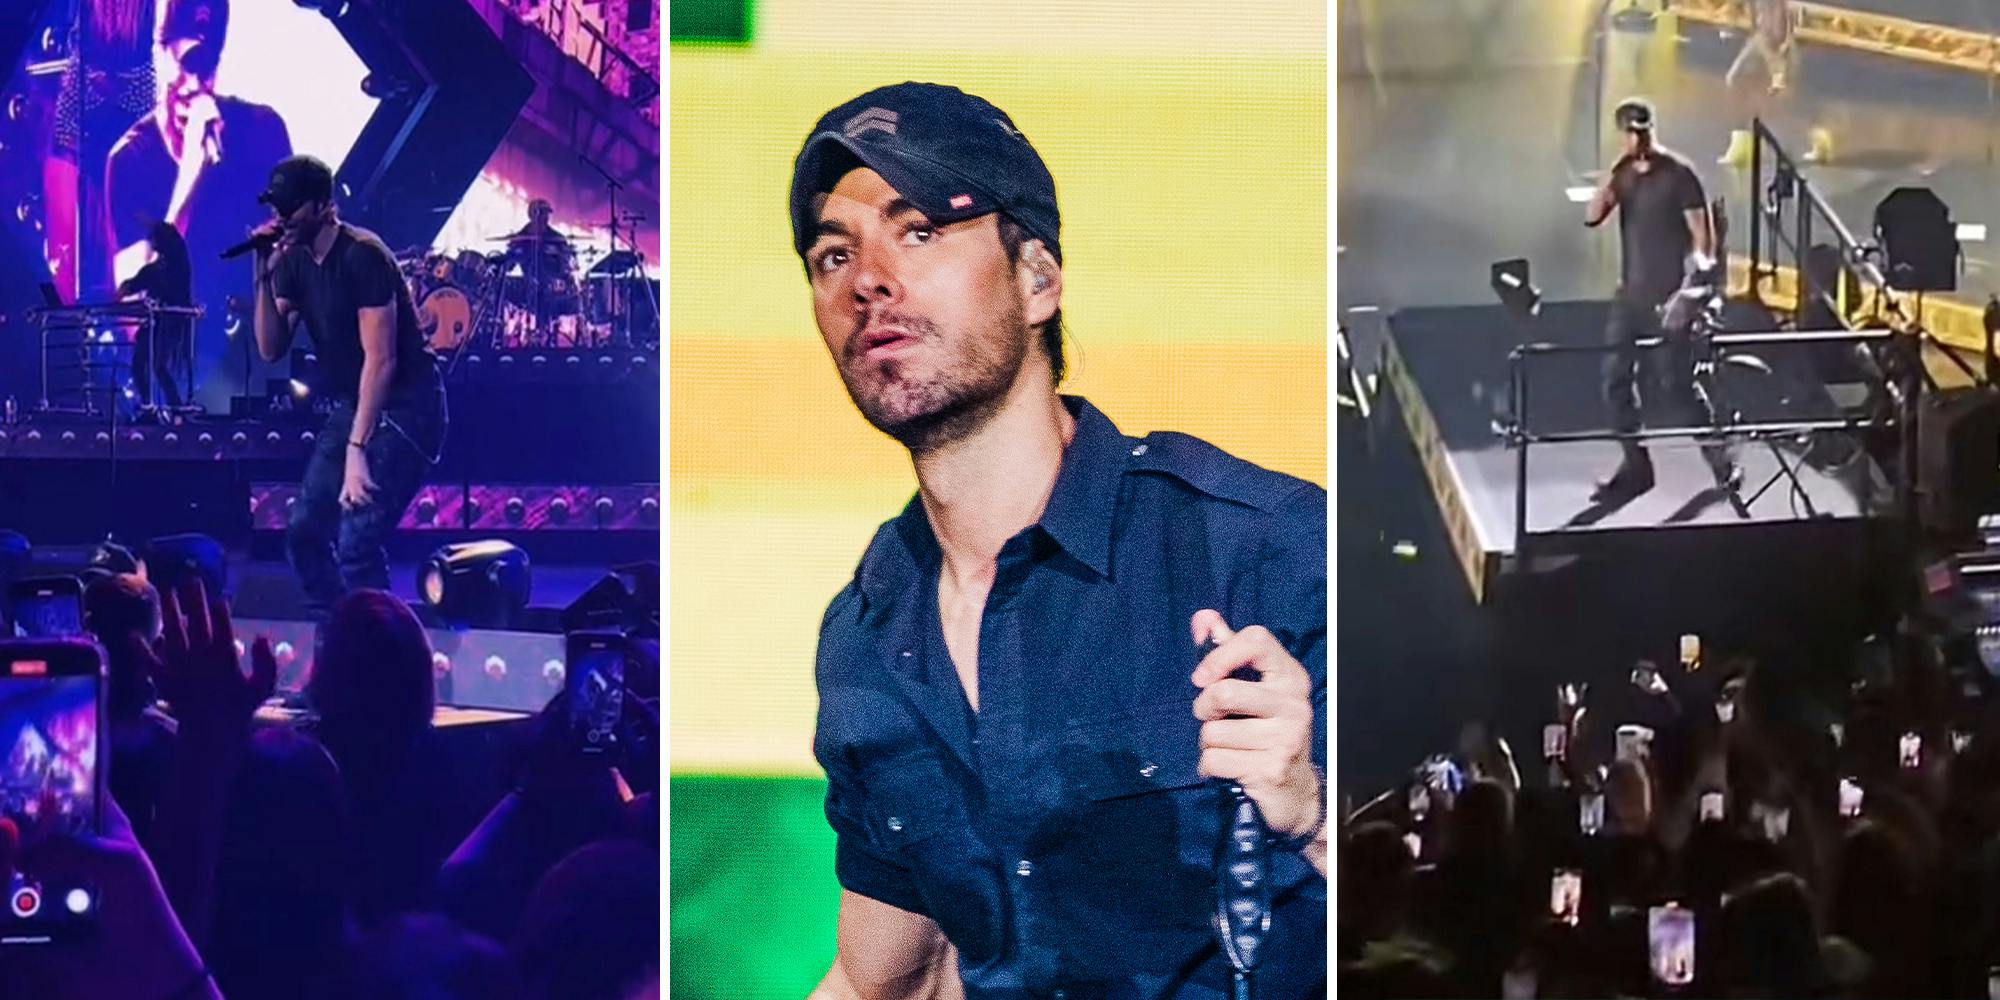 Enrique Iglesias fans are thrilled he's finally on tour